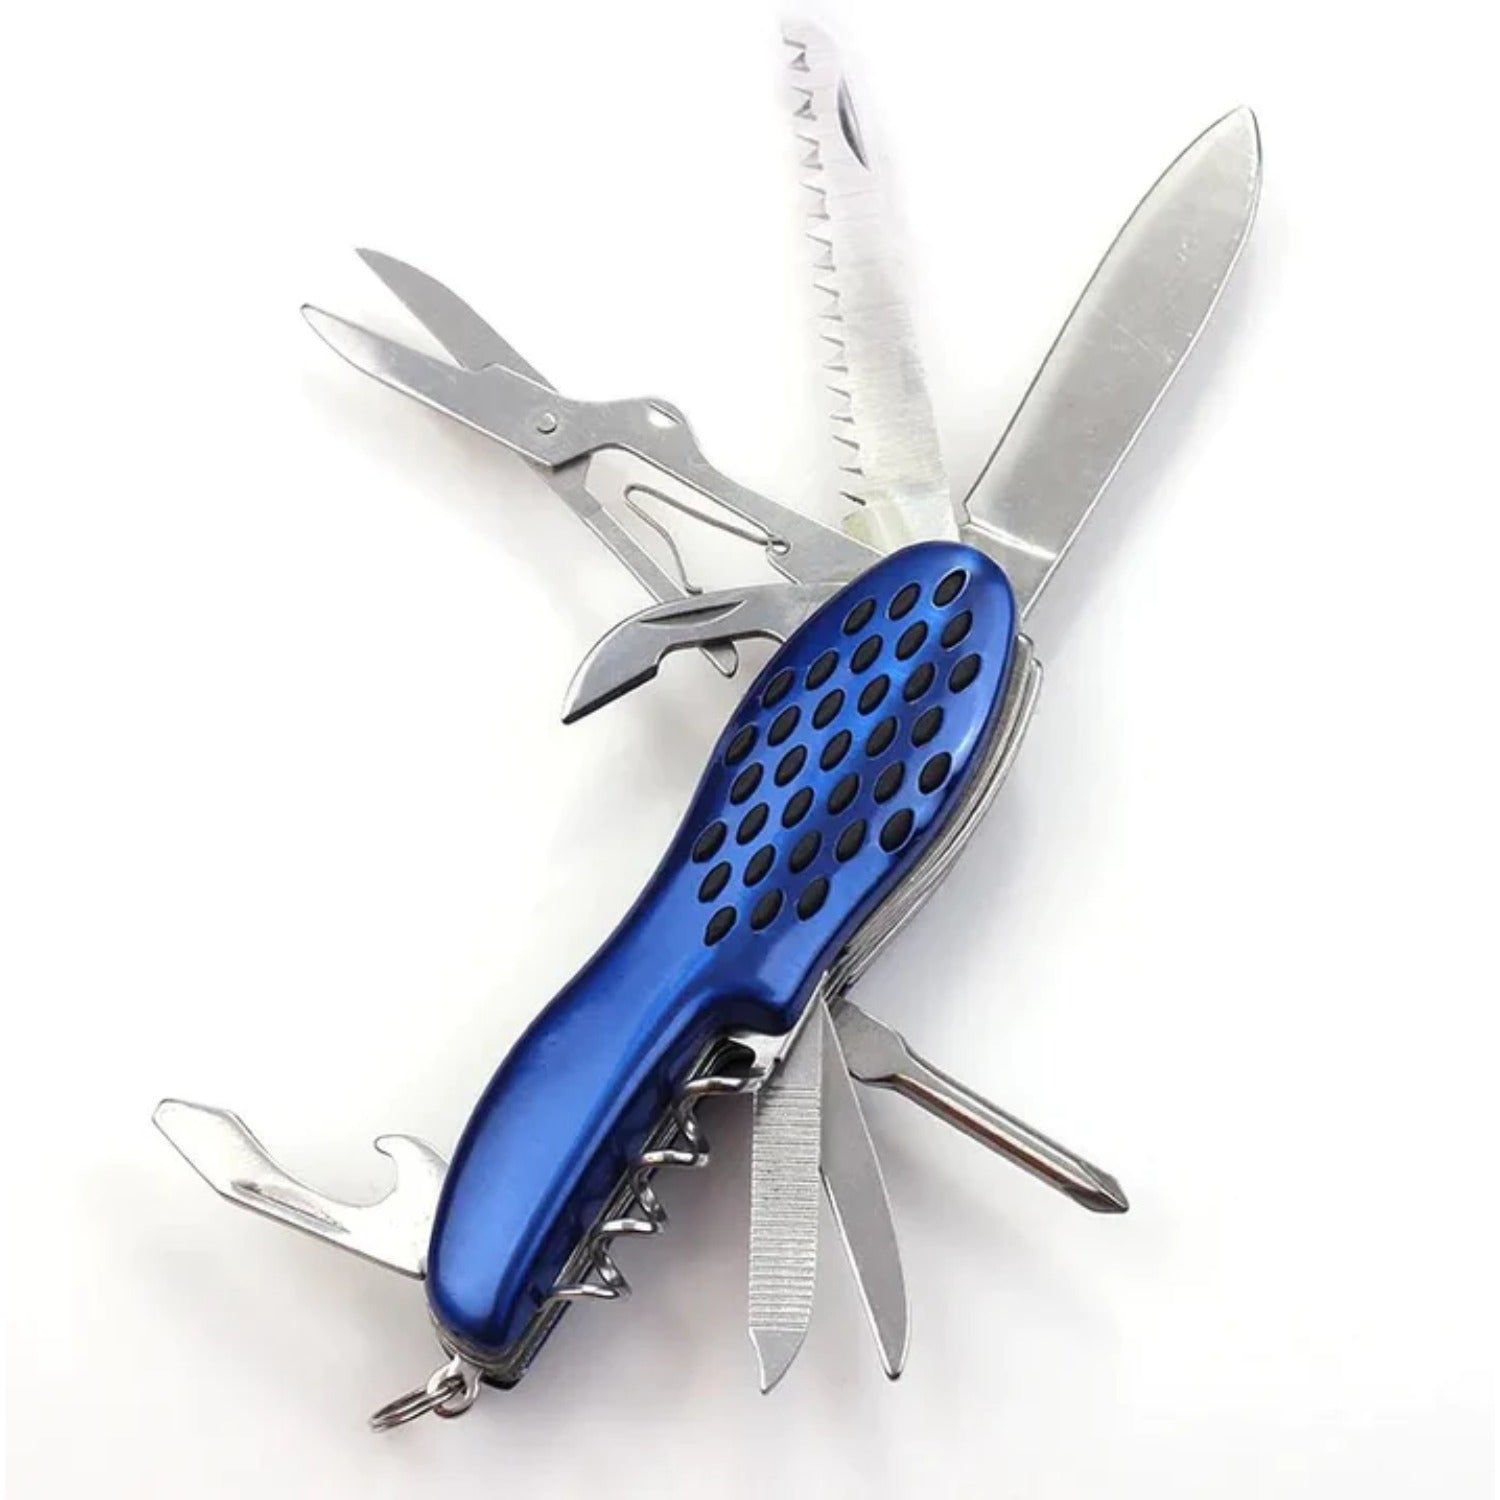 Buy Gokyo Swiss Styled Pocket Knife & Multitool 12 in 1 | Knives & Tools at Gokyo Outdoor Clothing & Gear